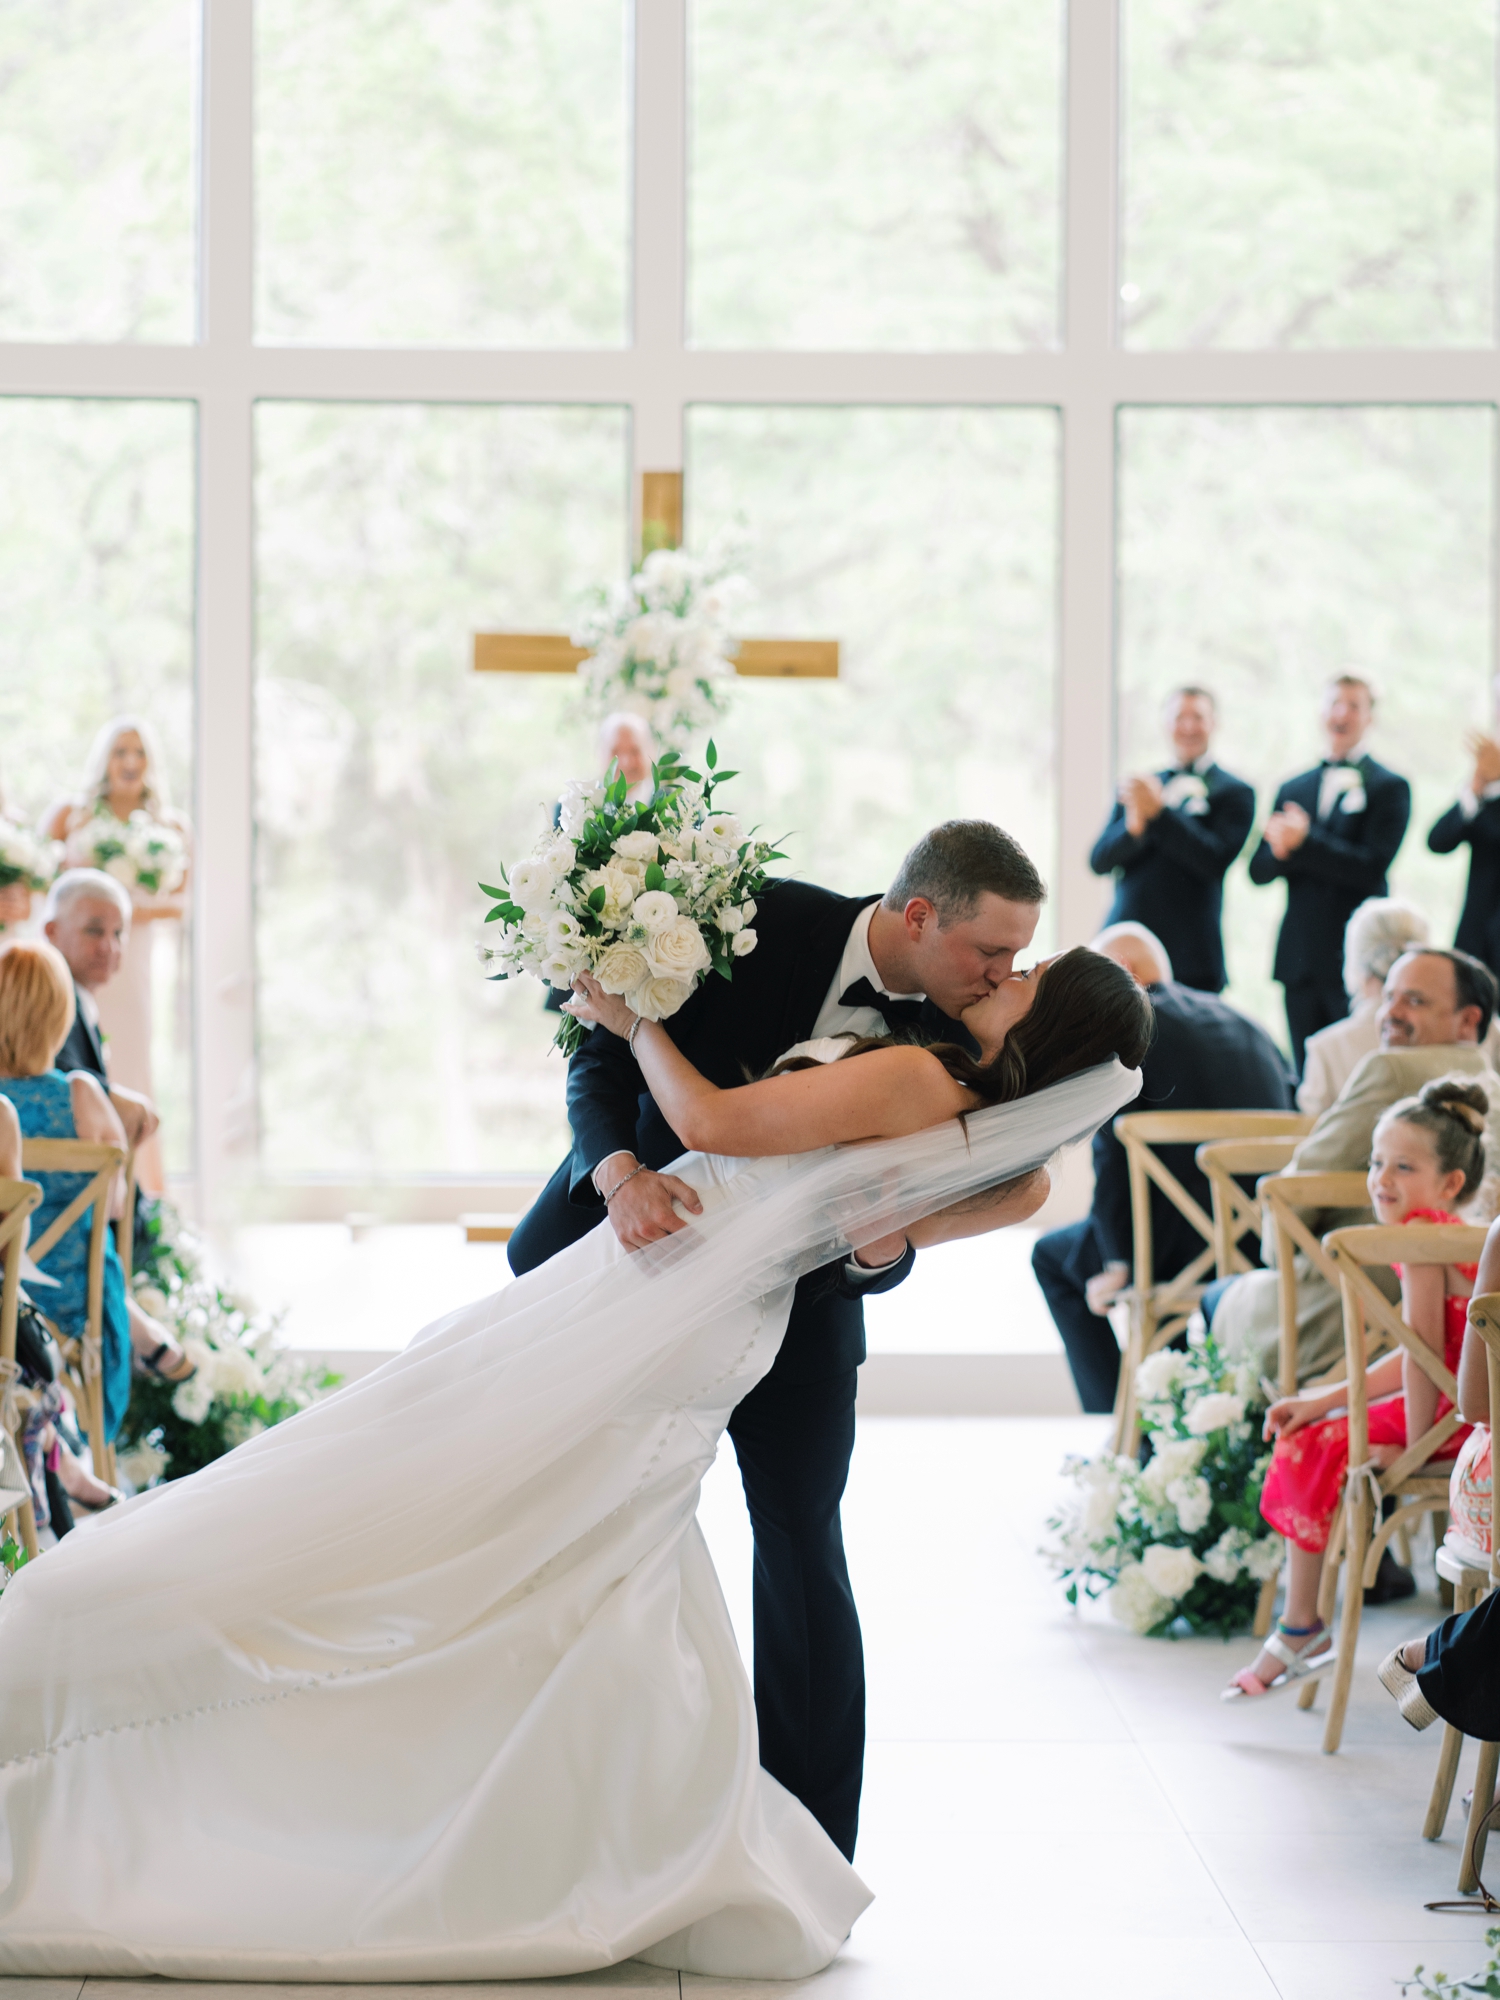 Classic wedding day details at an all-white wedding in the Texas Hill Country | The Preserve at Canyon Lake